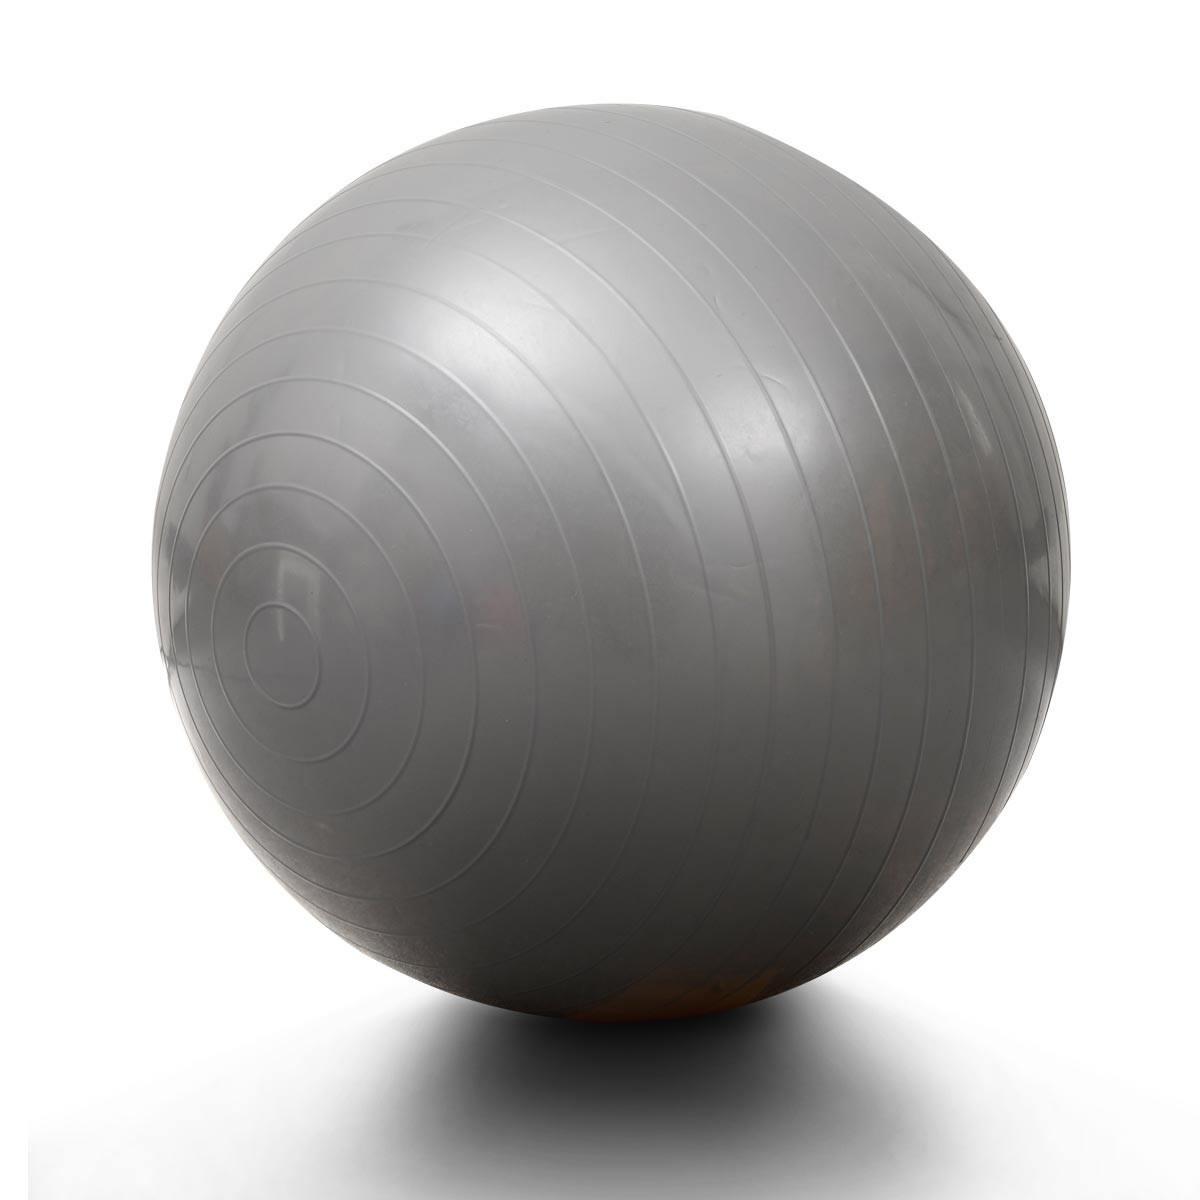 29 In. Exercise Pilates Balance Fitness Yoga Ball W / Air Pump